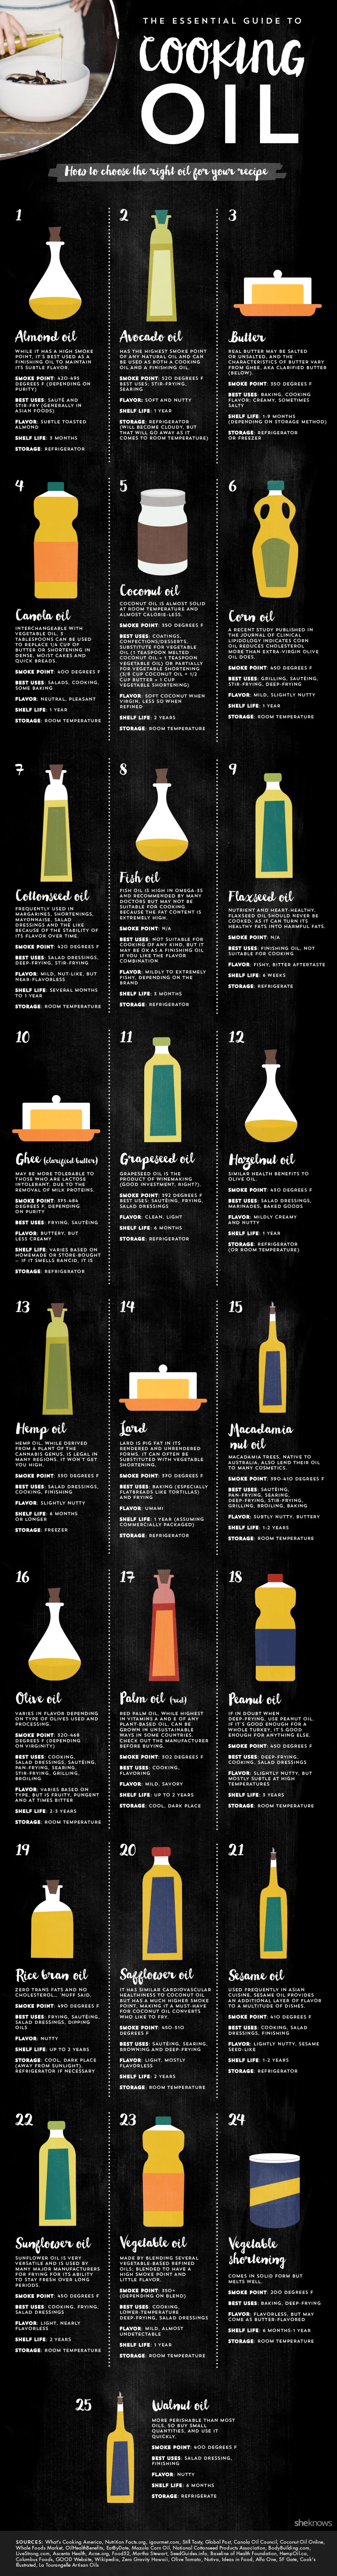 How to choose the right oil for your recipe #infographic